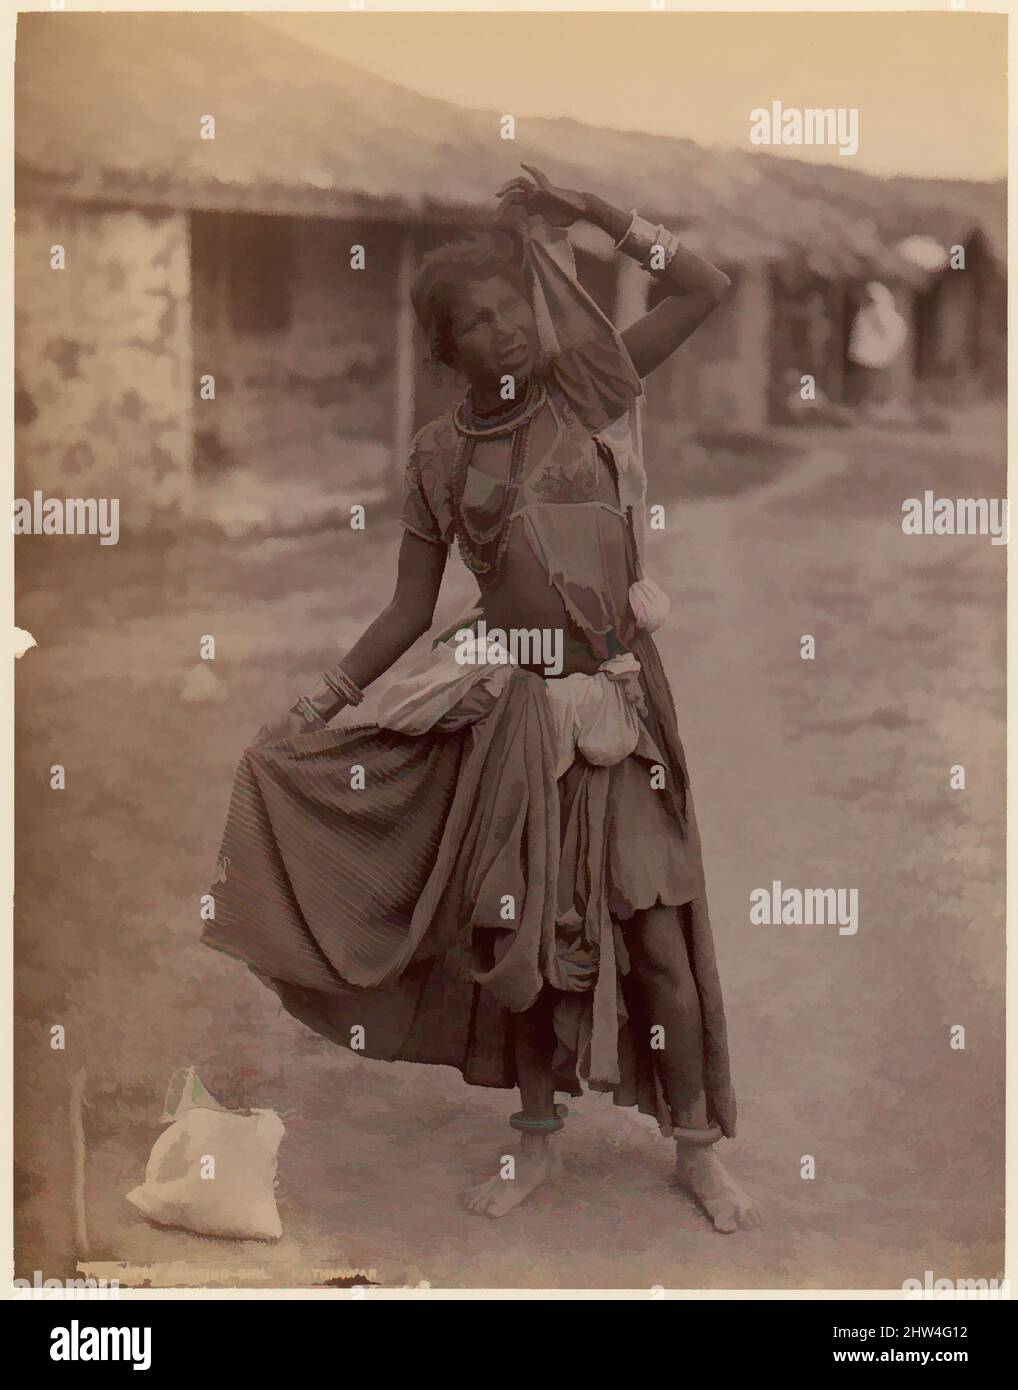 Art inspired by A Gypsy Dancing-Girl, Kathiawar, ca. 1915, Albumen silver print from glass negative, 23.5 x 18.2 cm (9 1/4 x 7 3/16 in.), Photographs, E. Taurines (probably French, active ca. 1885–1901, Classic works modernized by Artotop with a splash of modernity. Shapes, color and value, eye-catching visual impact on art. Emotions through freedom of artworks in a contemporary way. A timeless message pursuing a wildly creative new direction. Artists turning to the digital medium and creating the Artotop NFT Stock Photo